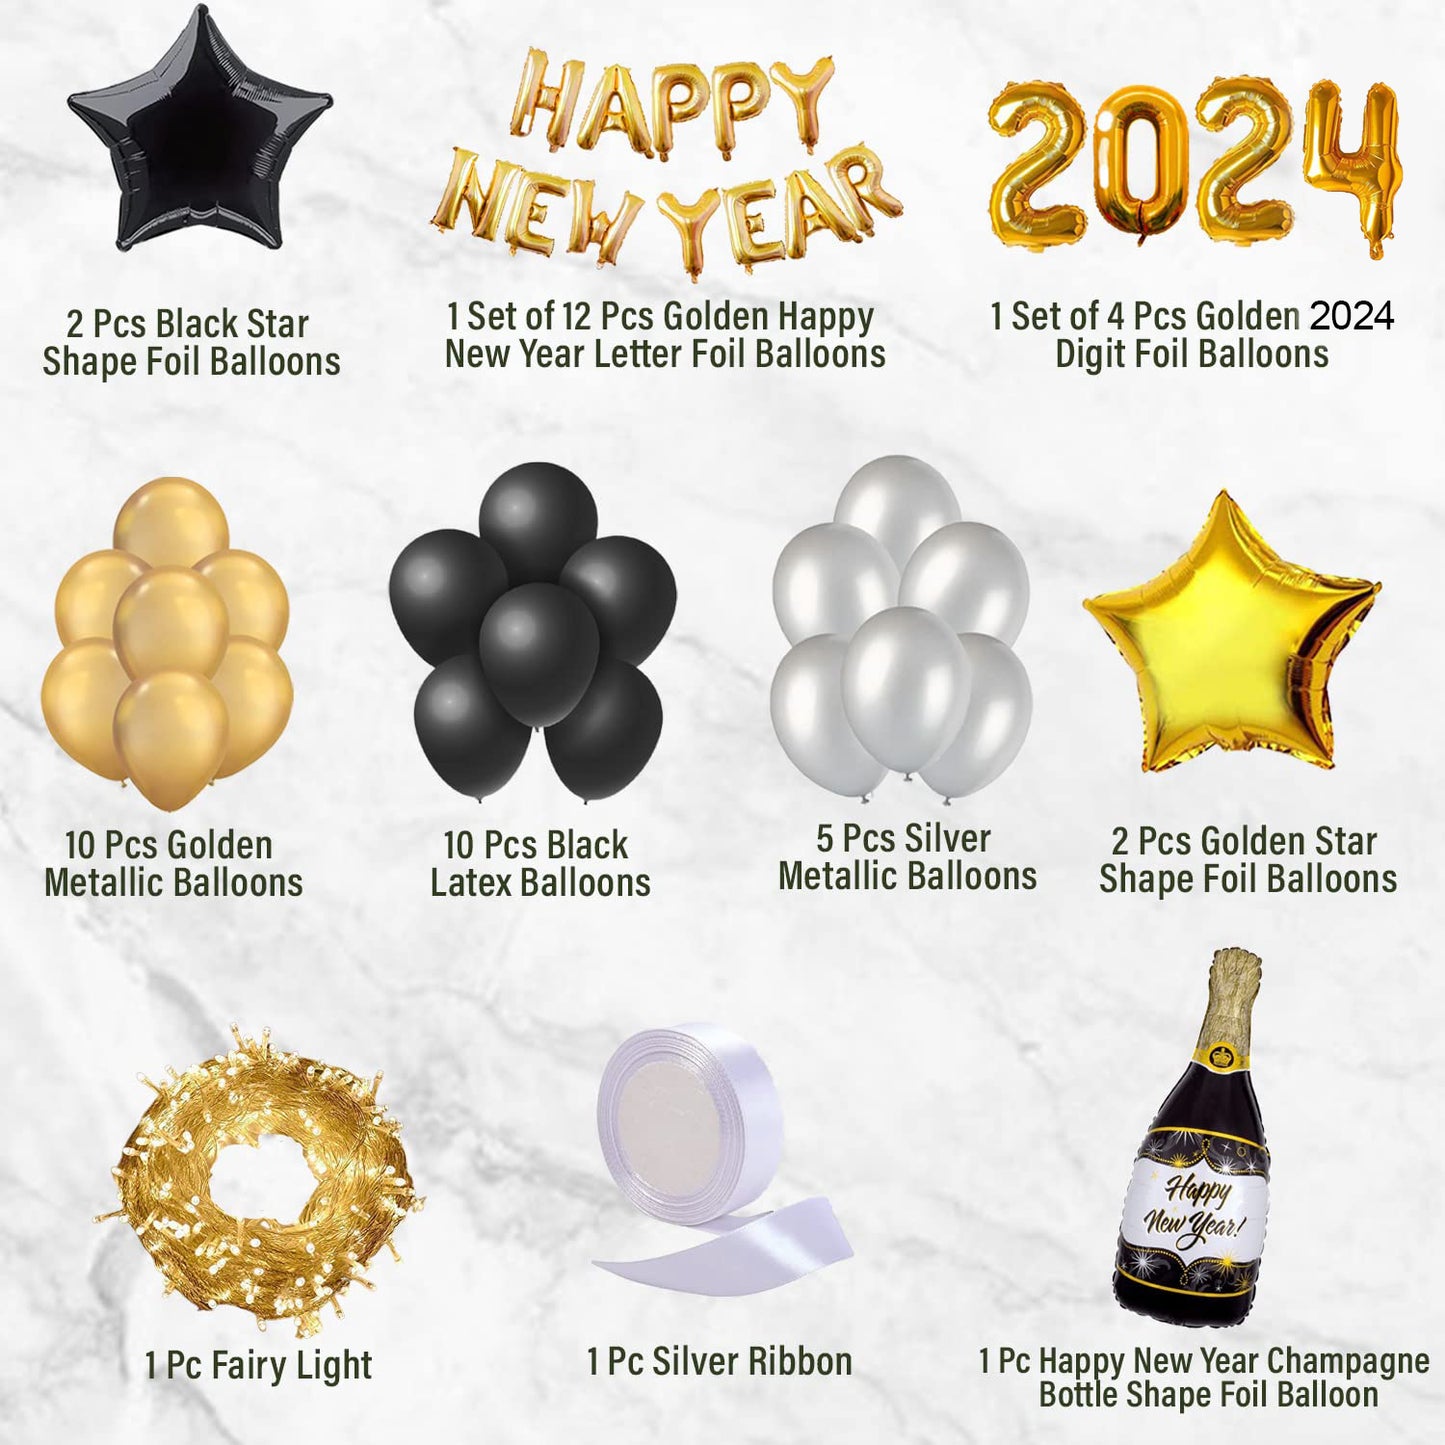 Black and Gold New Year Decoration Items - Pack of 48 Pcs - Happy New Year 2024 Foil, Star Shape, Light, Star Shape, Champagne Bottle, Metallic & Latex Balloons for Room Decoration